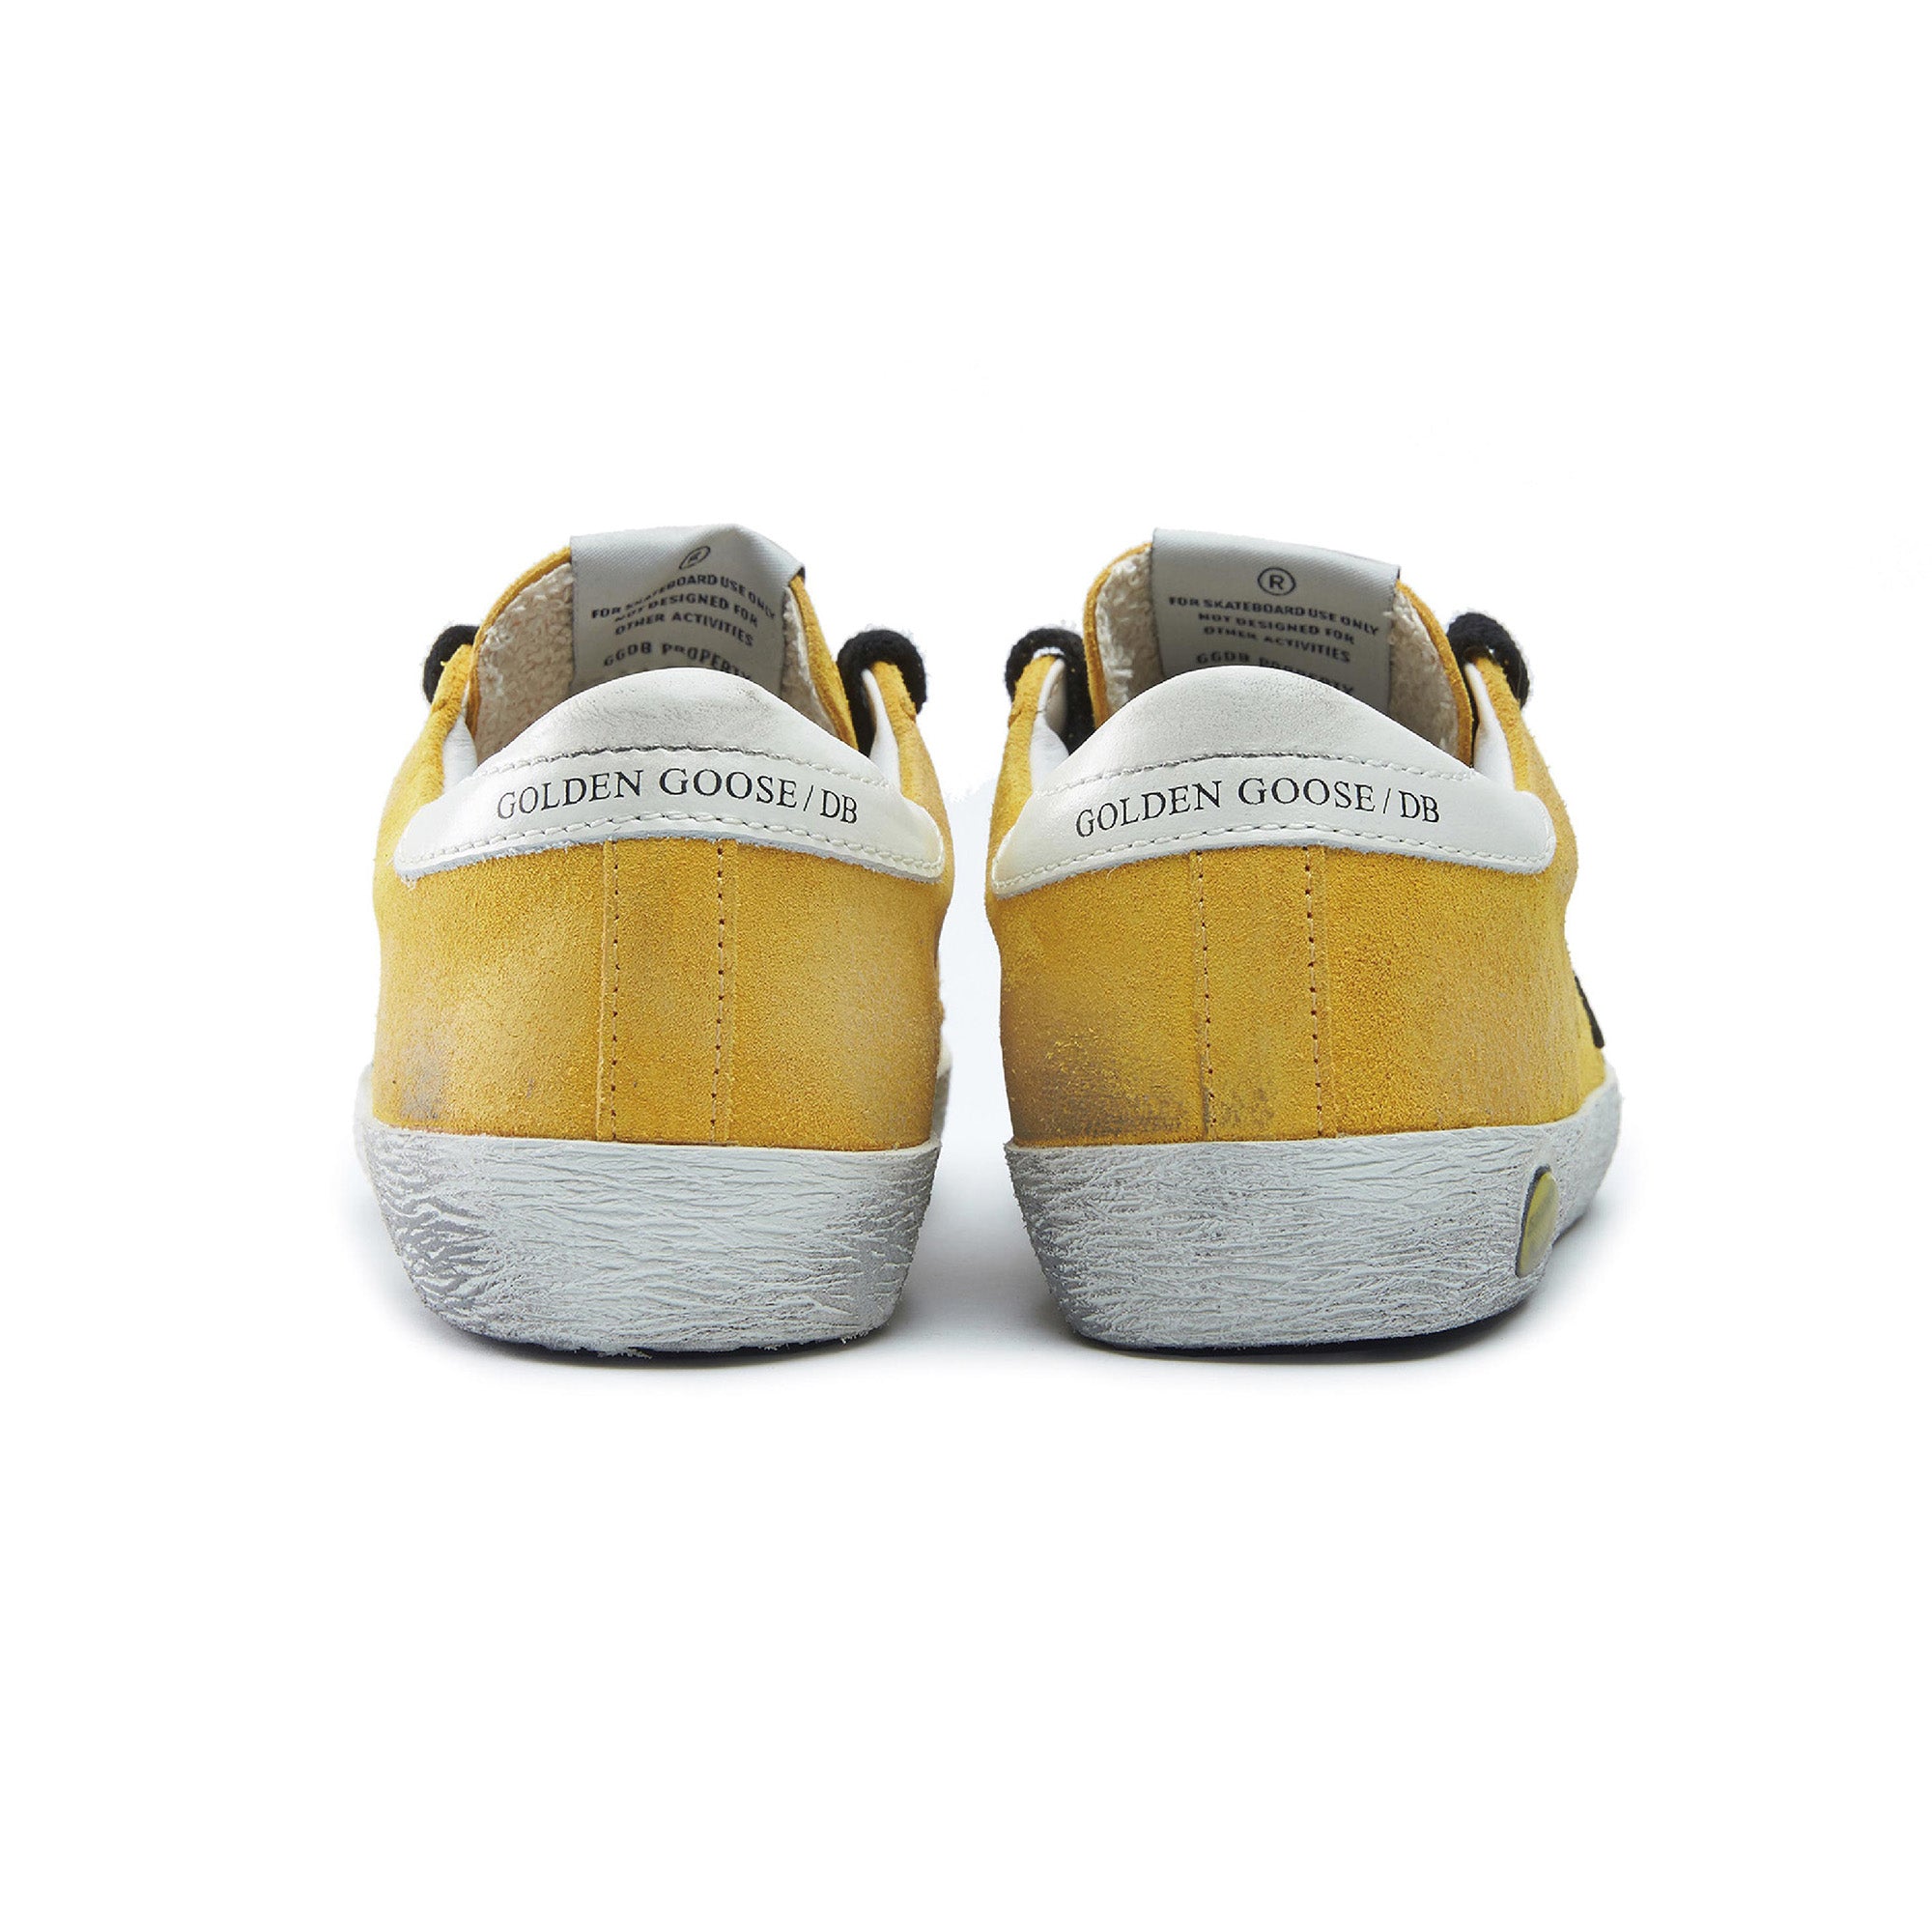 Boys & Girls Yellow & Black Star Leather Shoes